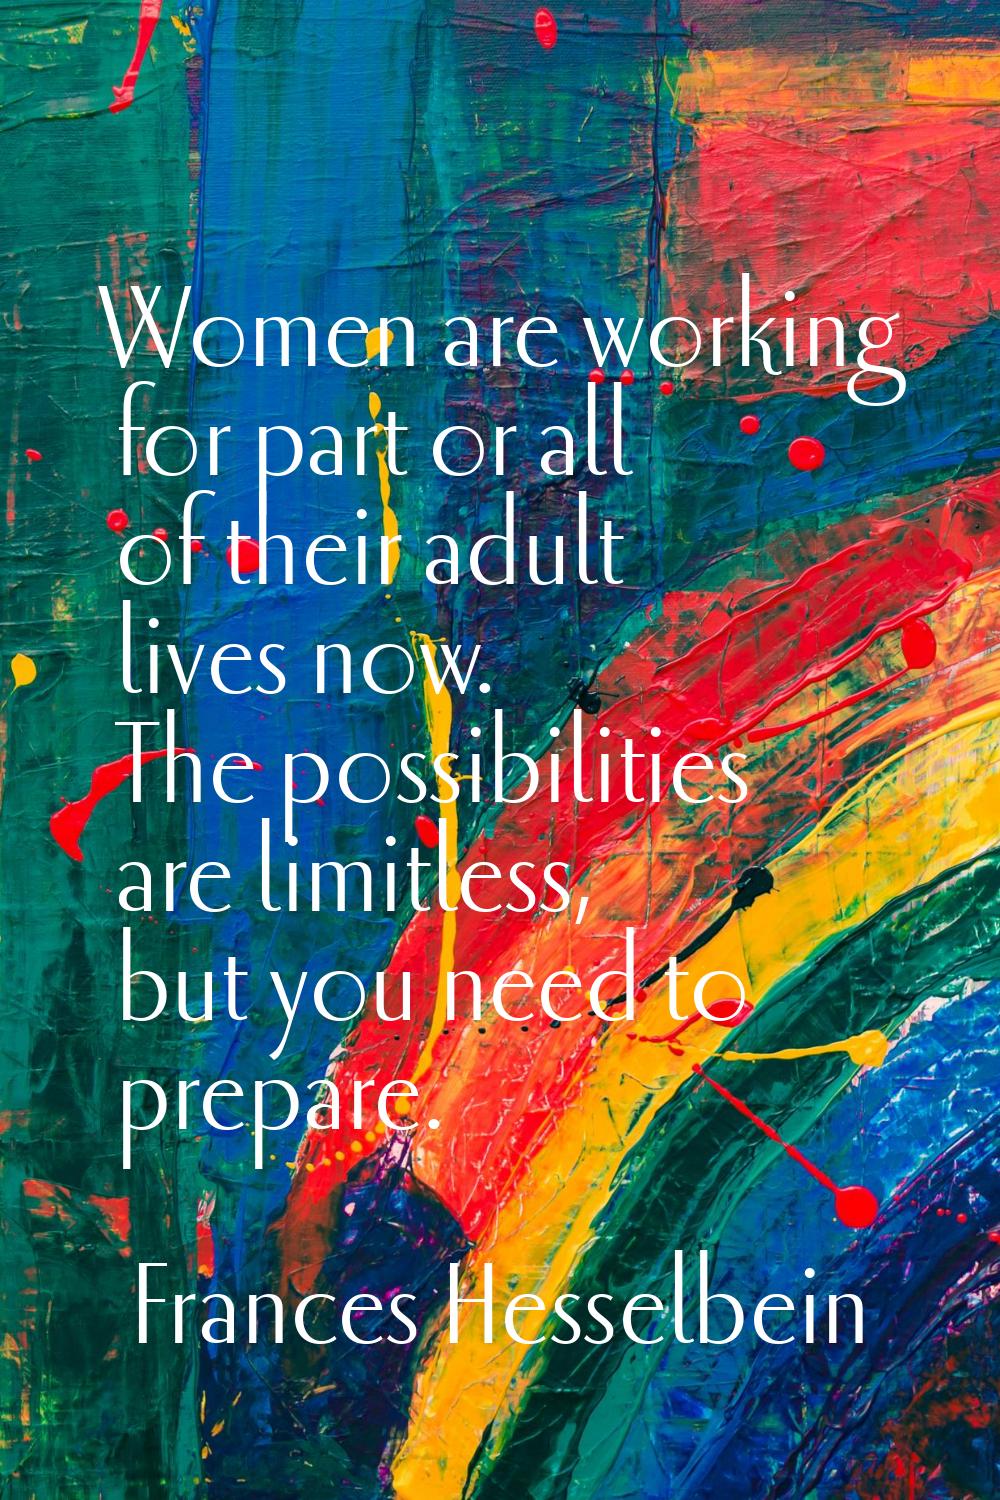 Women are working for part or all of their adult lives now. The possibilities are limitless, but yo